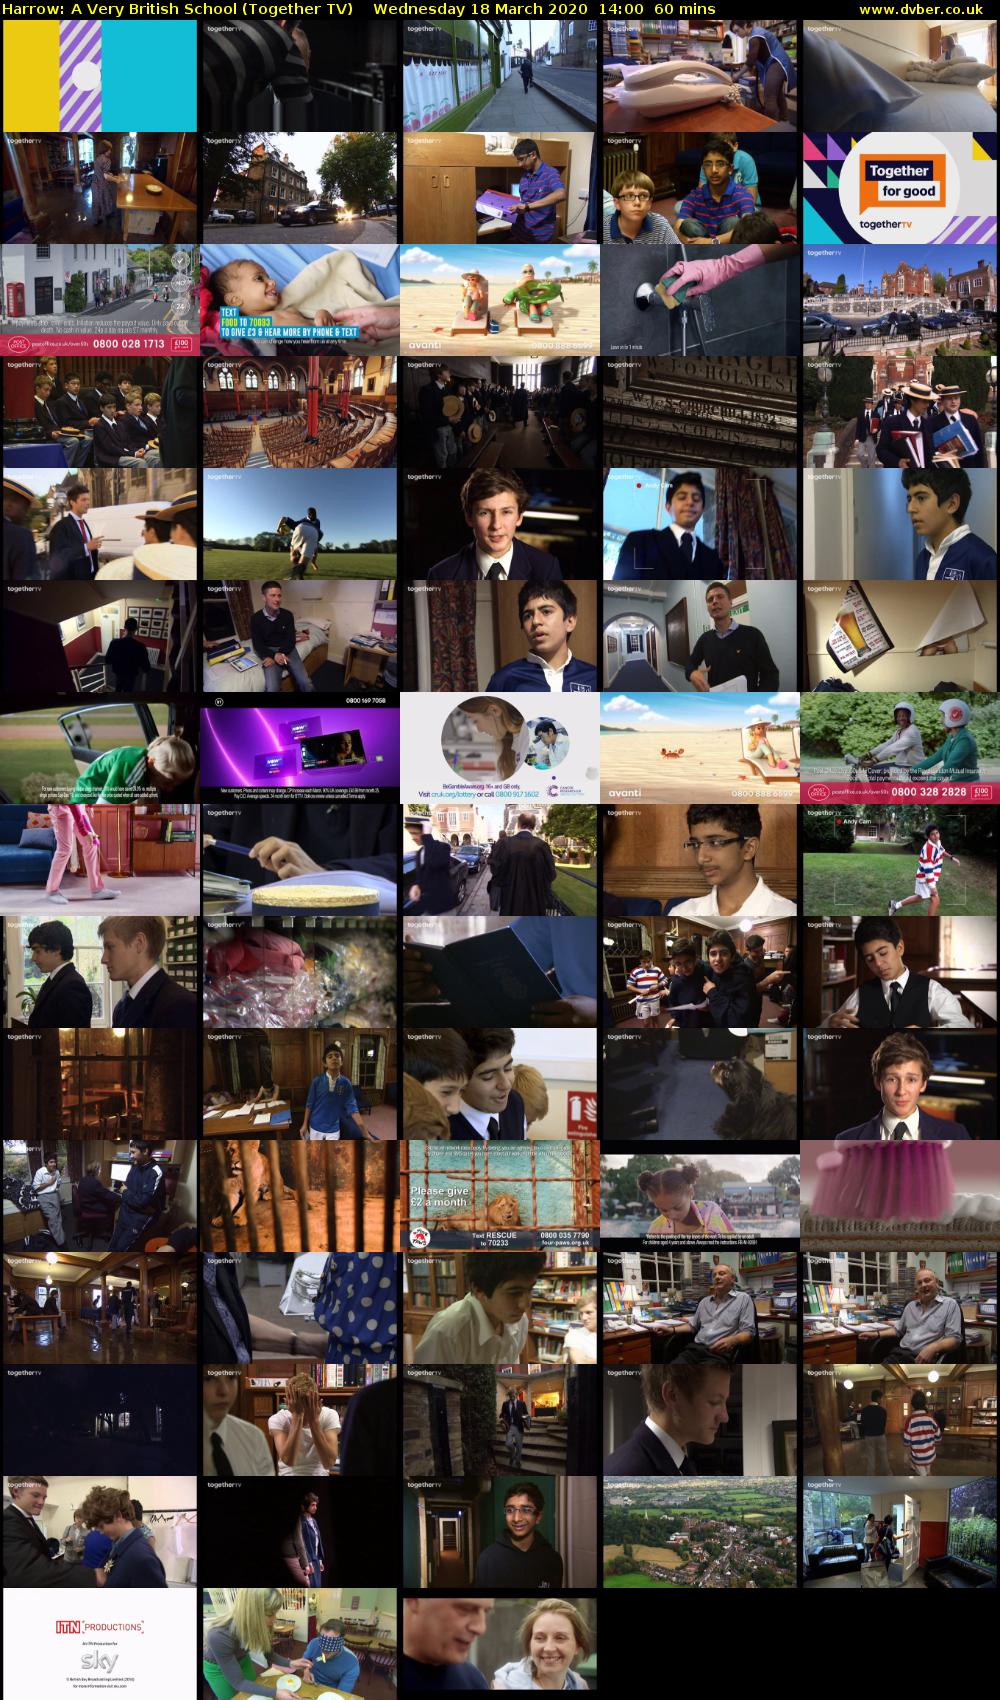 Harrow: A Very British School (Together TV) Wednesday 18 March 2020 14:00 - 15:00